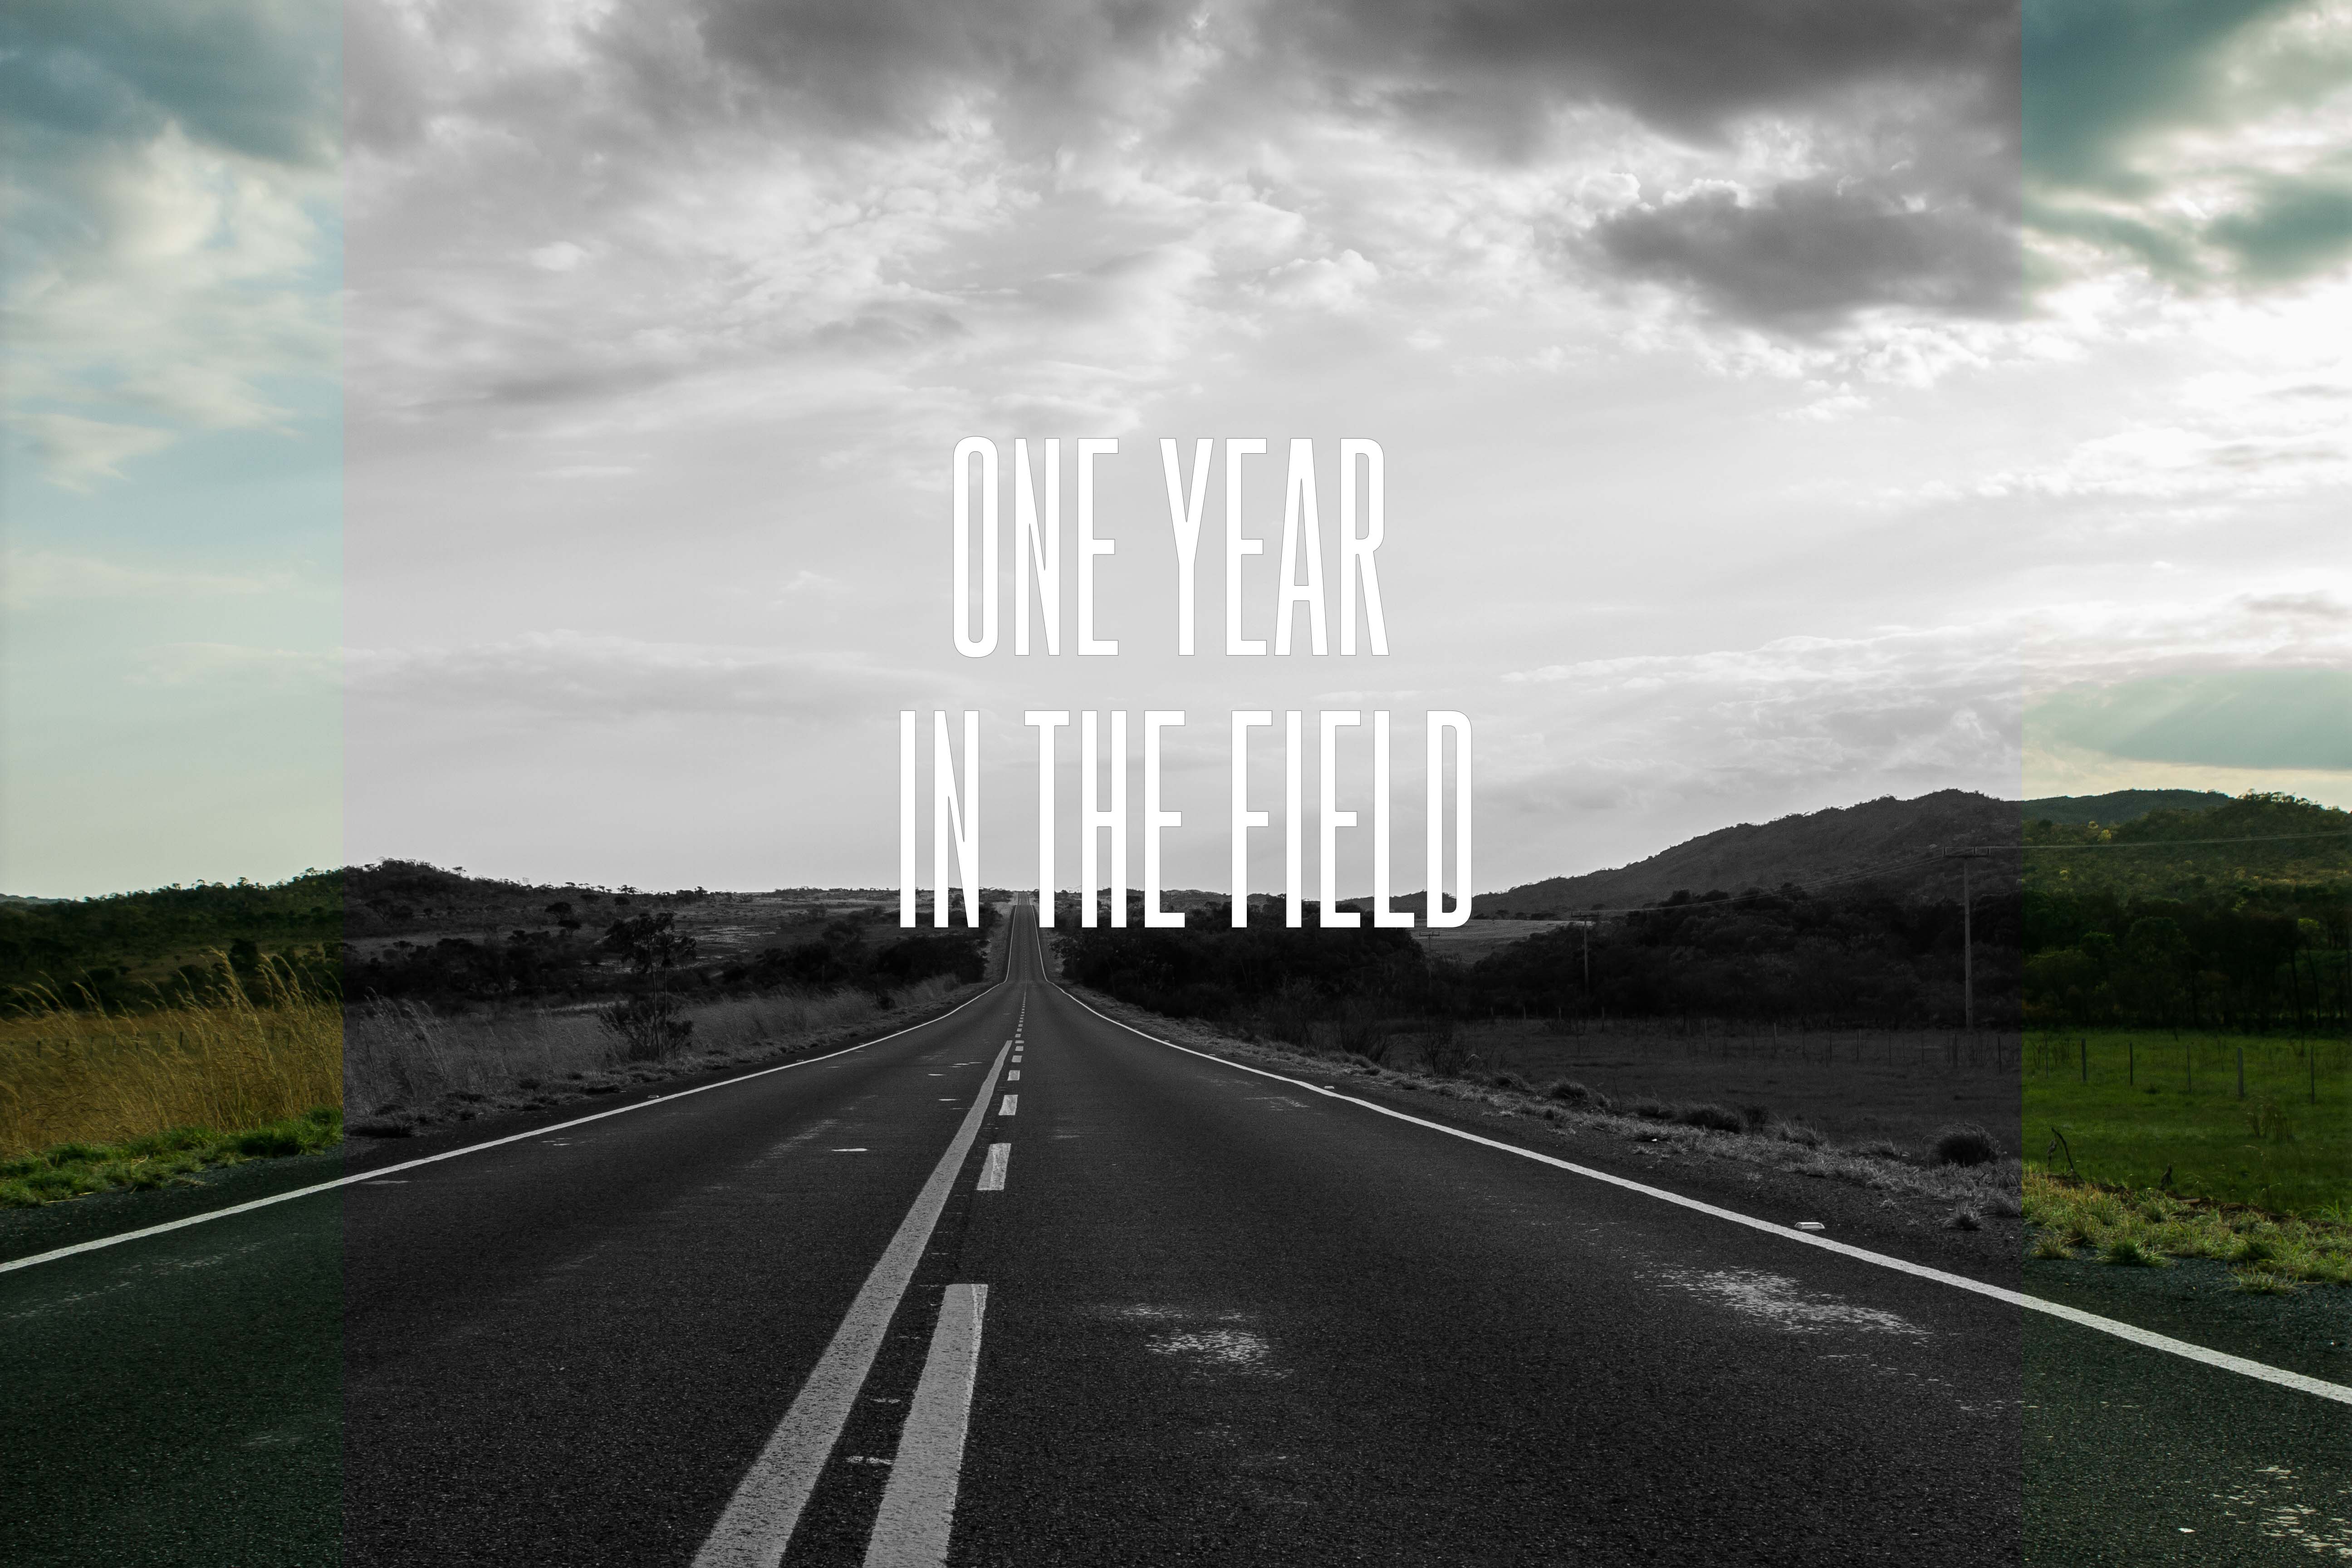 One year in the field